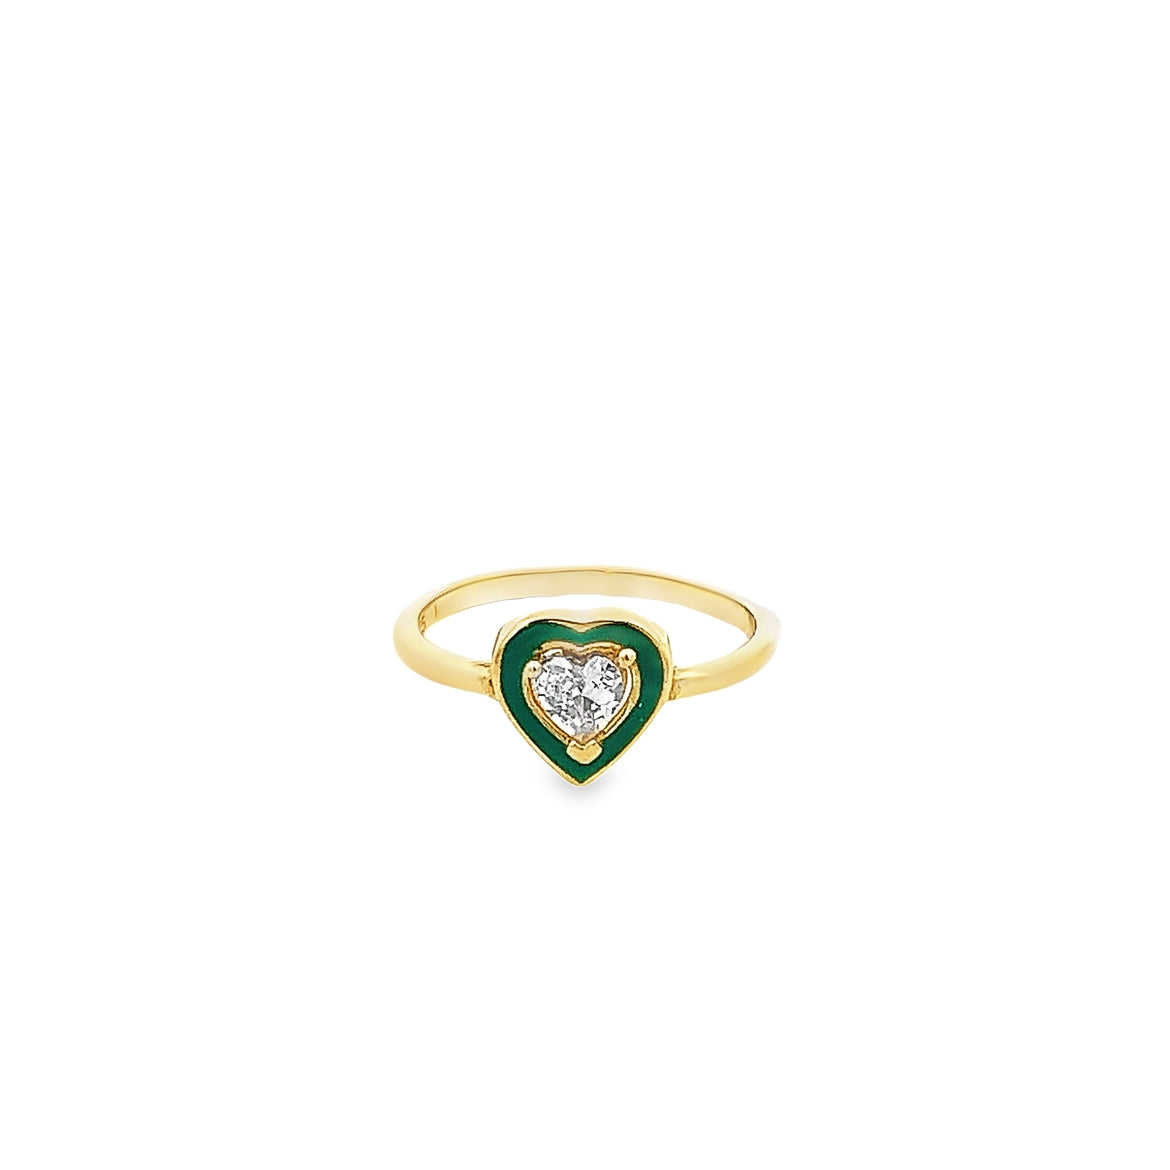 925 SILVER GOLD PLATED HEART CUT CRYSTAL RING WITH GREEN ENAMEL